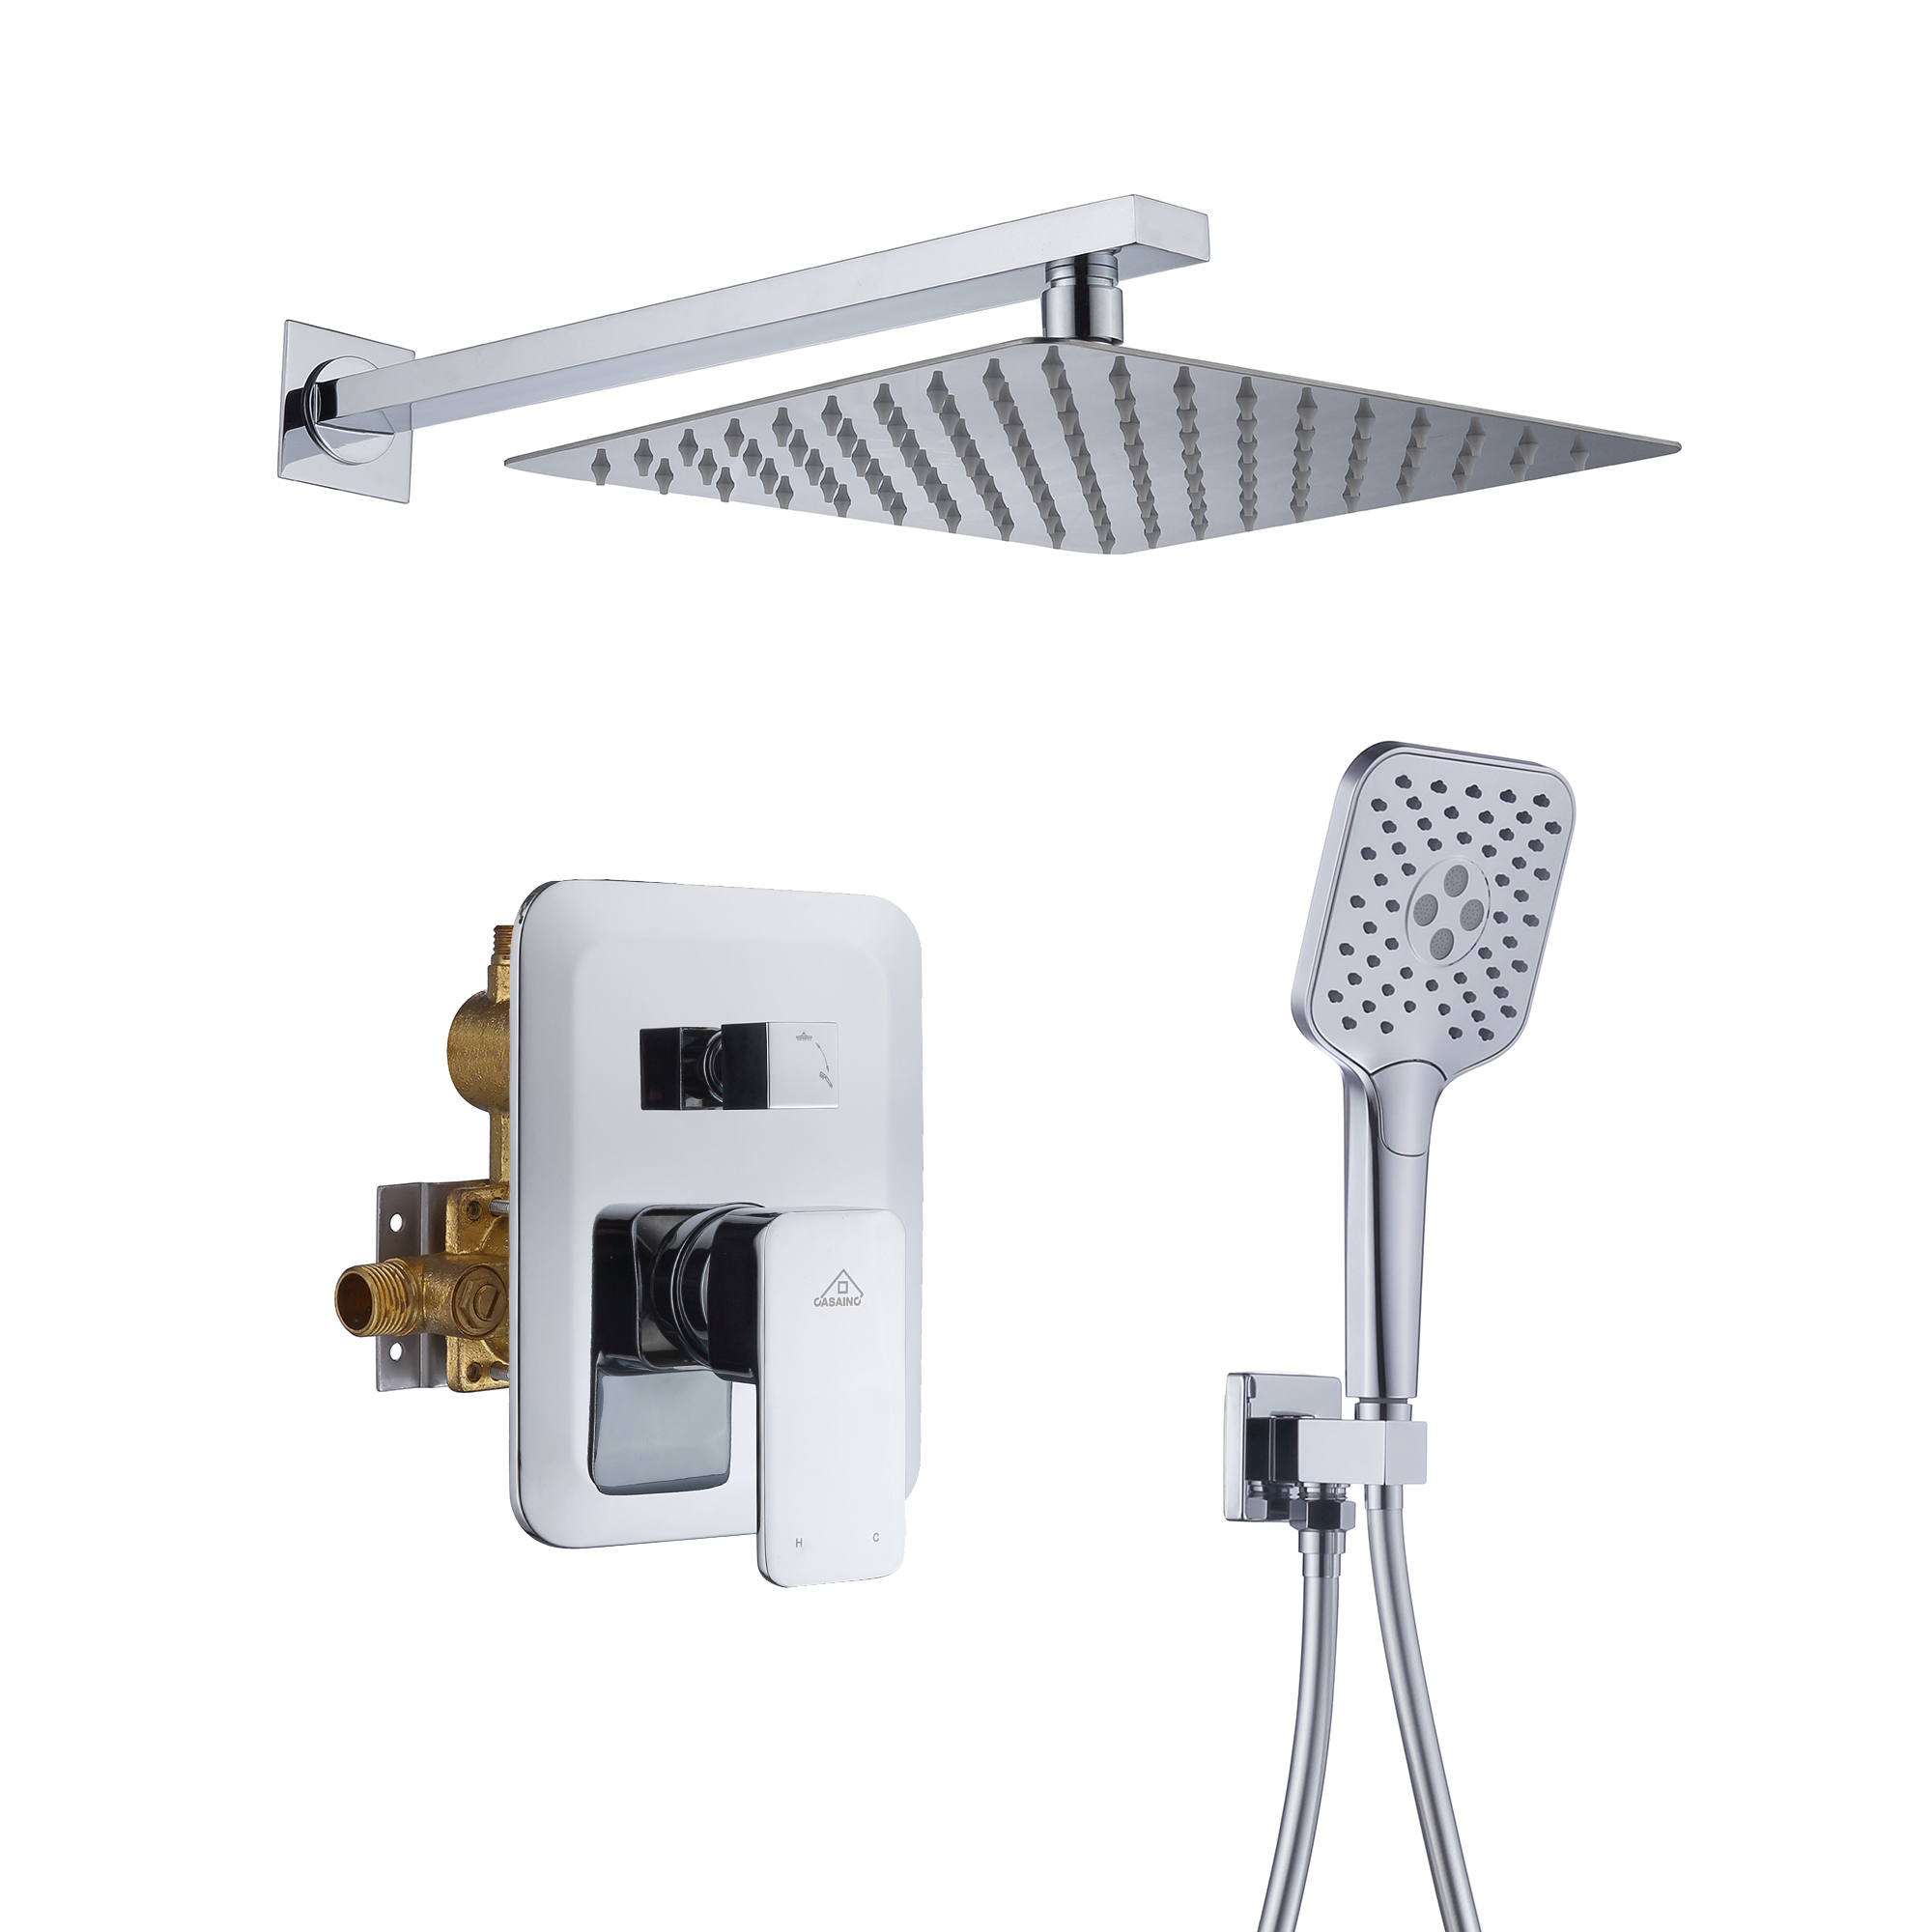 CASAINC 9.8" Square Wall-mounted Rain Shower Faucet with Pressure Balanced Valve